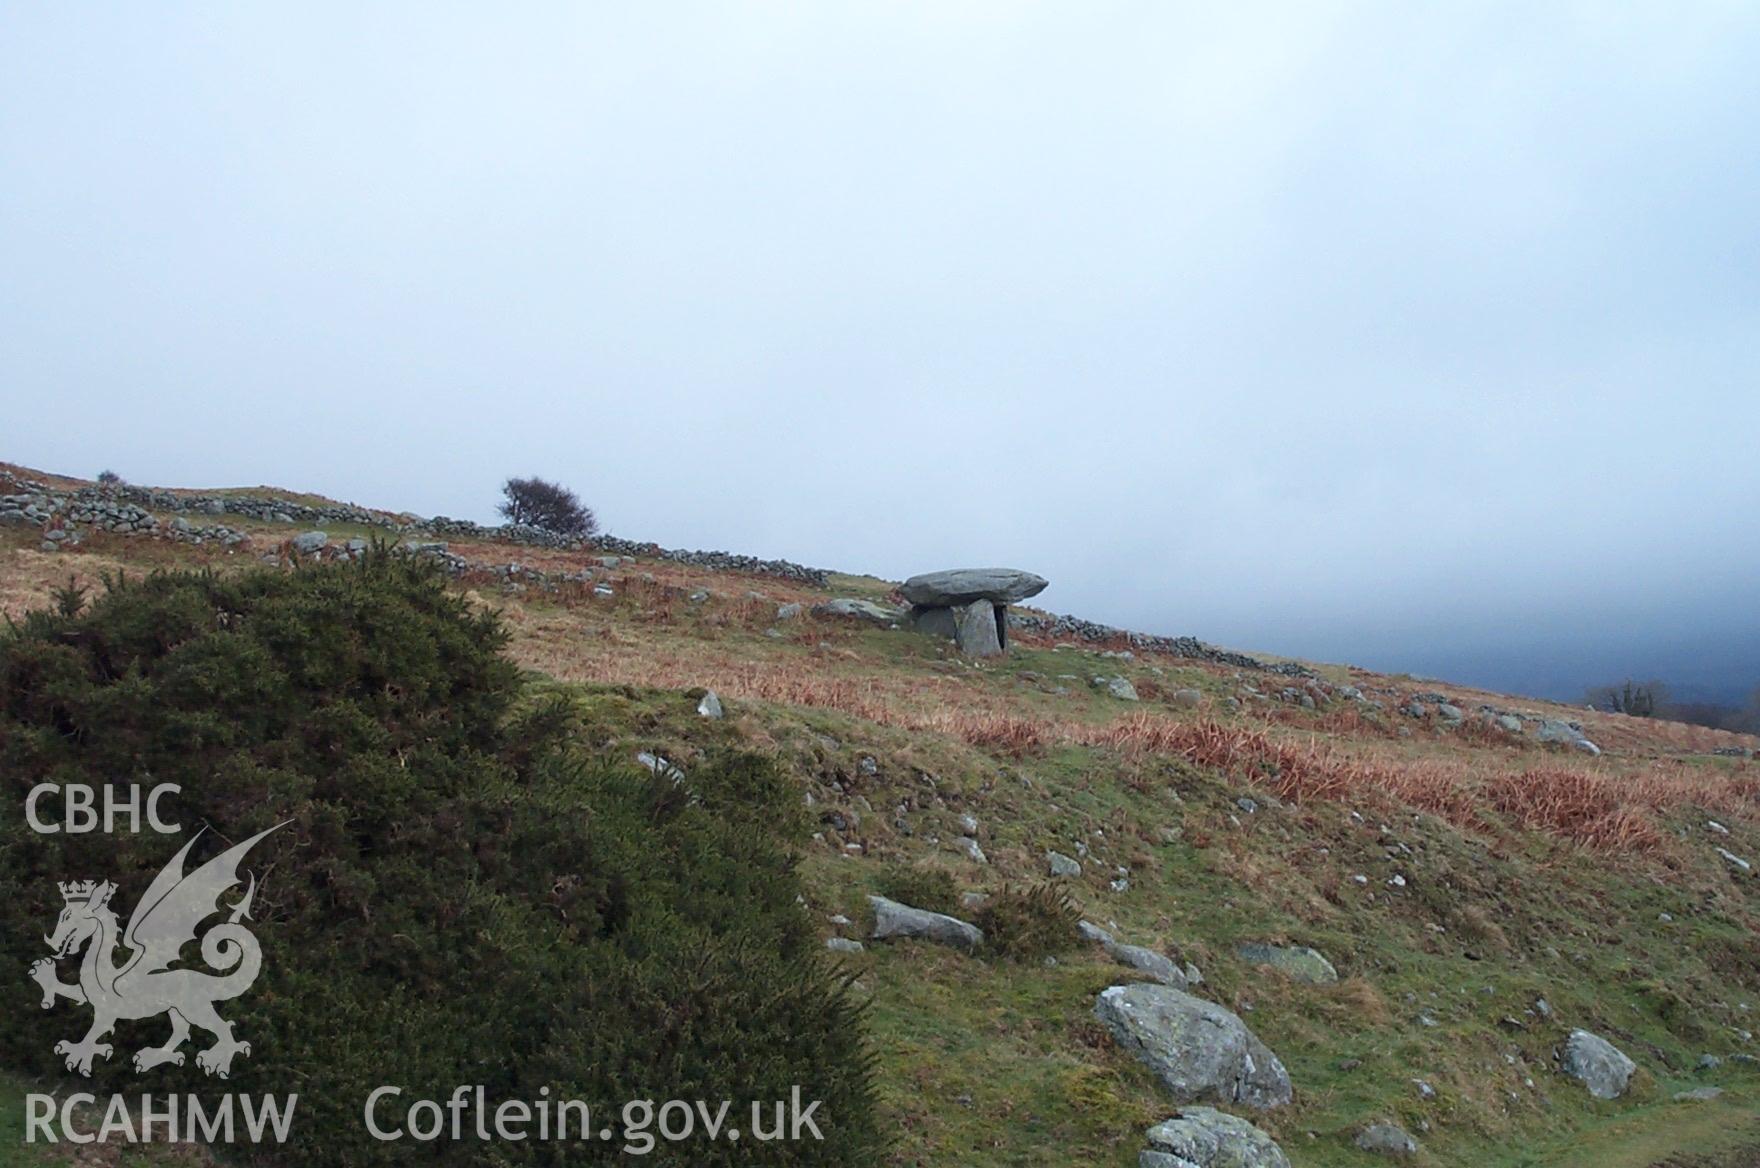 Digital photograph of Maen-y-bardd Burial Chamber from the North. Taken by P. Schofield on 30/03/2004 during the Eastern Snowdonia (North) Upland Survey.